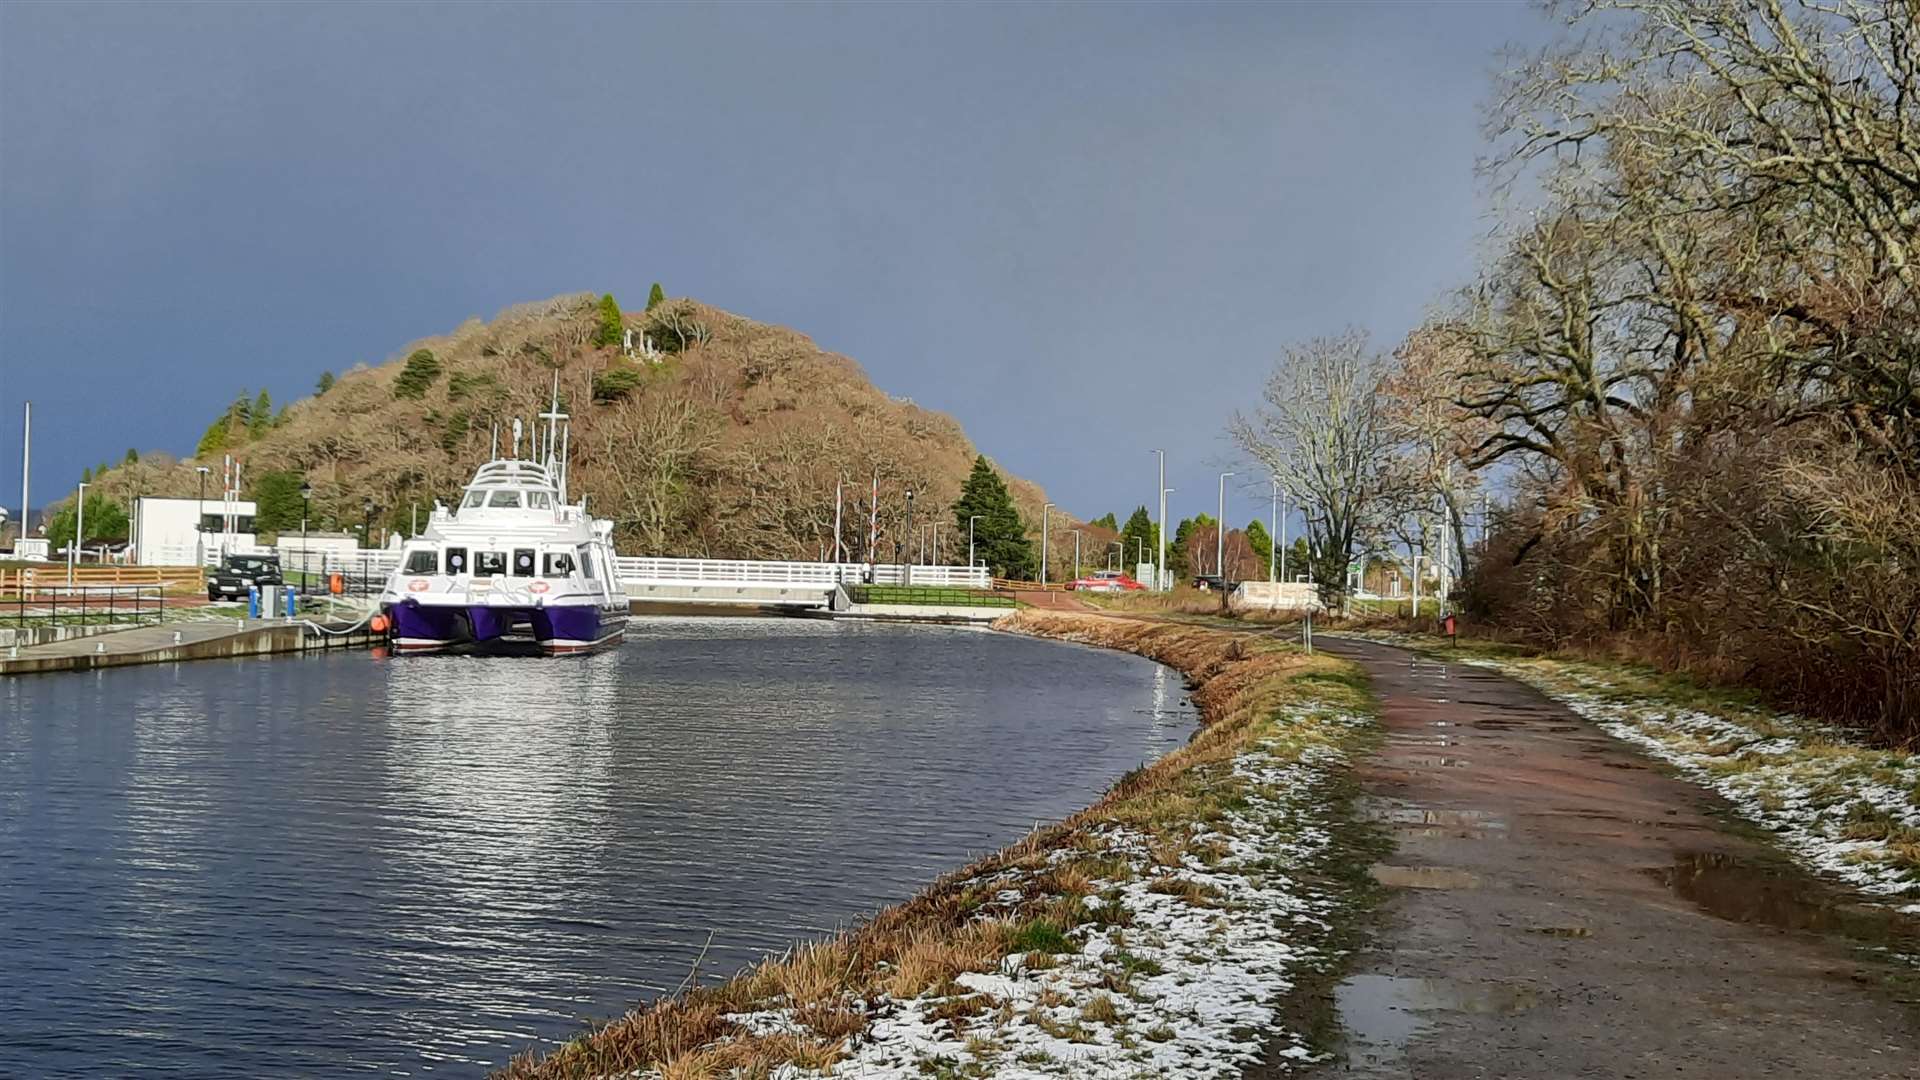 The Caledonian Canal marks its 200th anniversary this year.